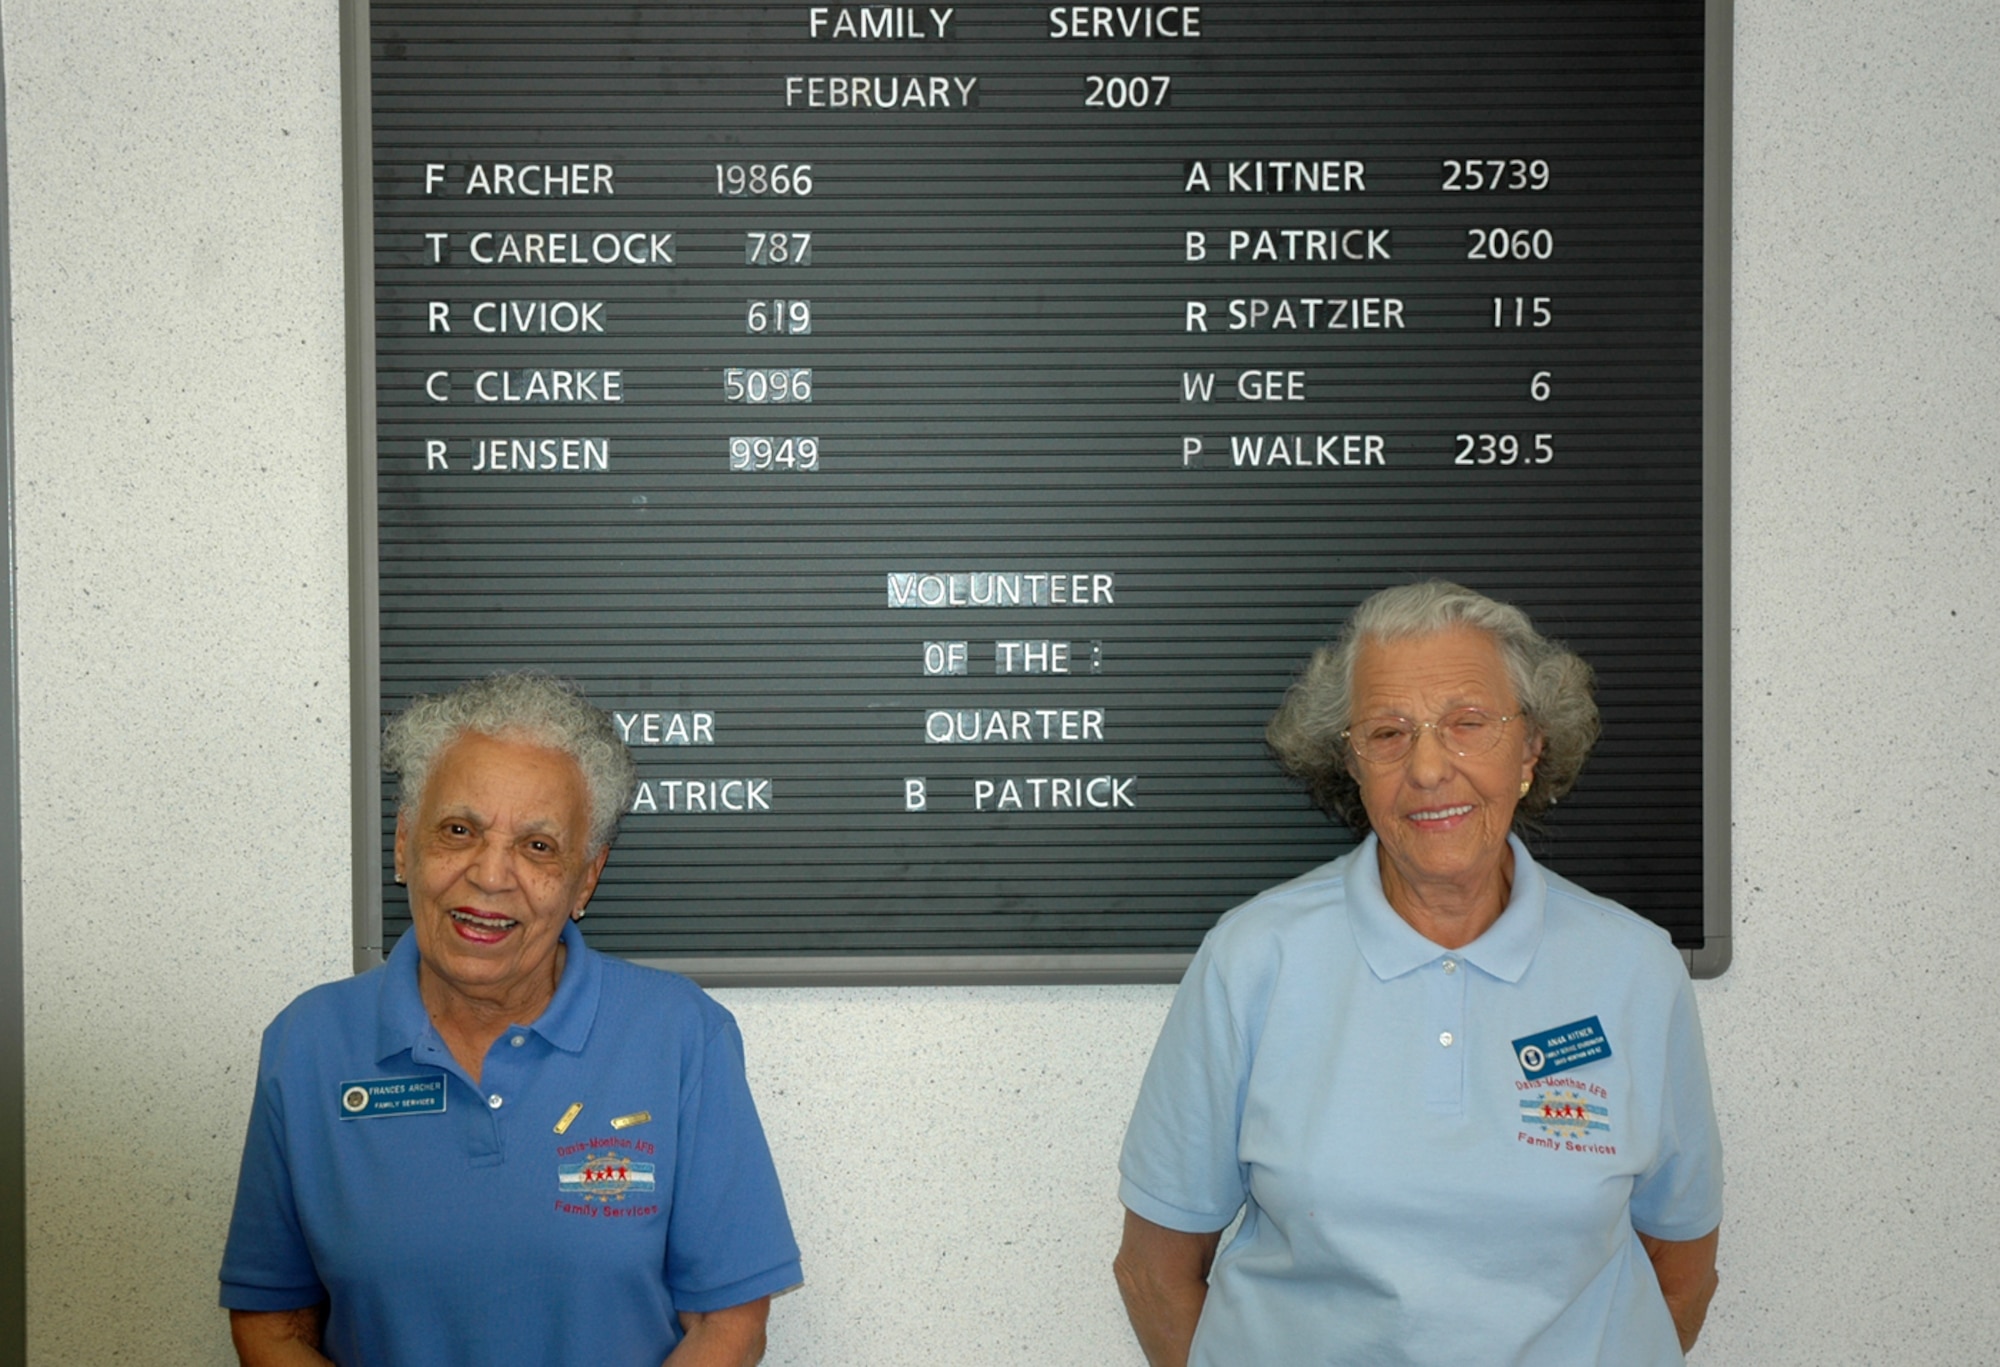 Frances Archer (left) and Anna Kitner, both family services volunteers at D-M's Airman and Family Readiness Center, stand in front of the volunteer service board. As their names at the top of the board indicate, Ms. Archer has volunteered nearly 20,000 hours, and Ms. Kitner has volunteered more than 25,000 hours to Airmen and their families. (U.S. Air Force photo/Staff Sgt. Jake Richmond)